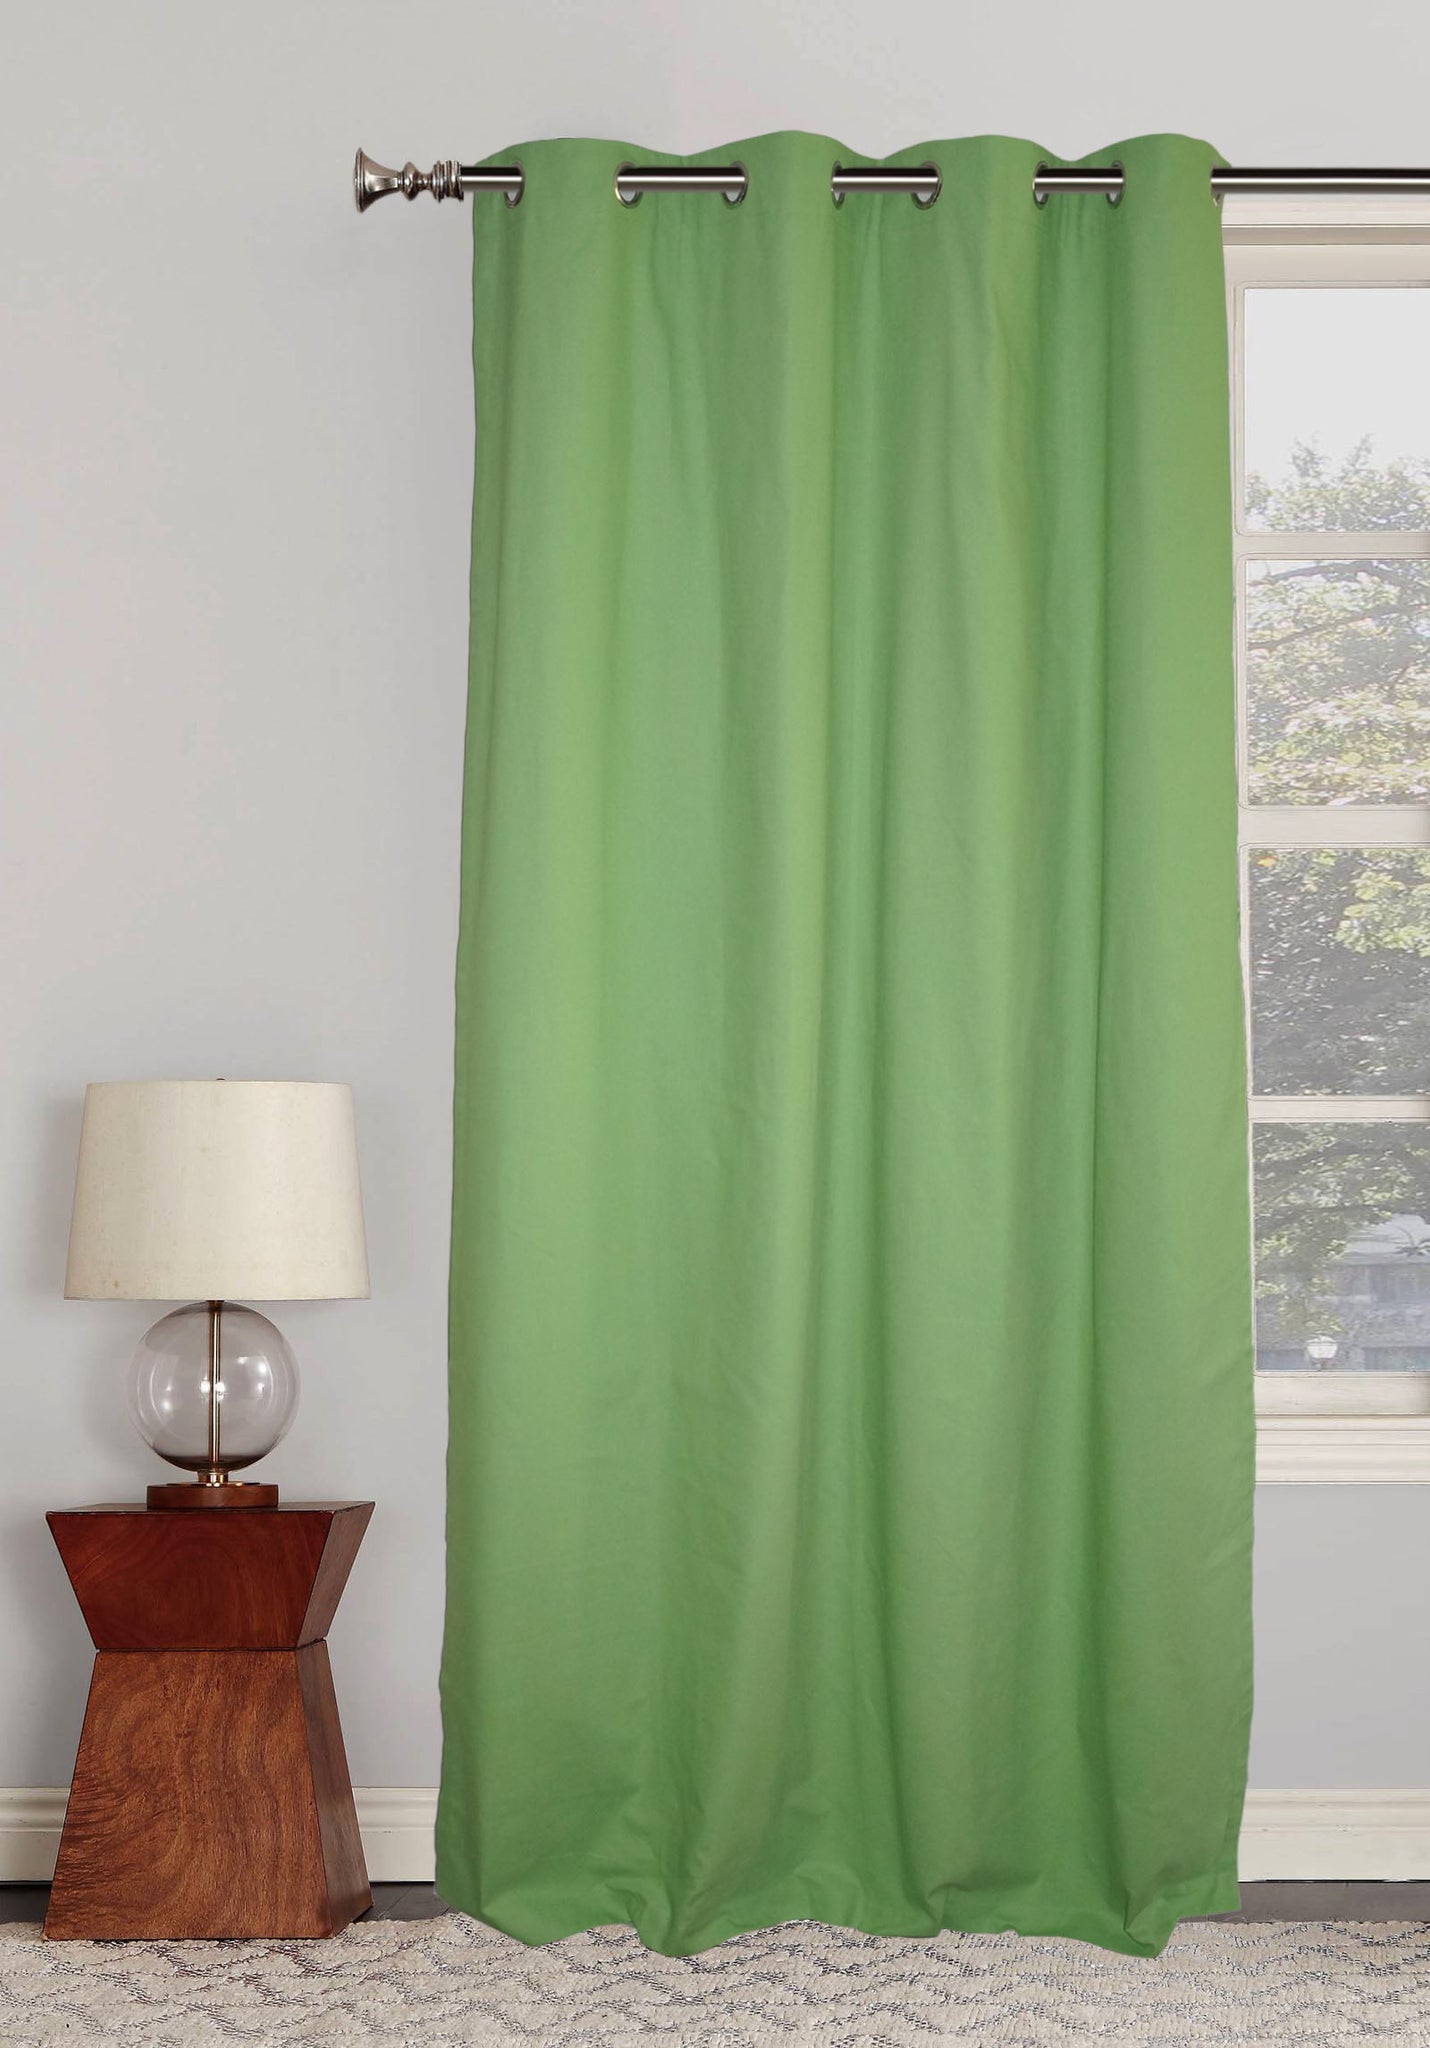 Lushomes curtains 7.5 feet long, Cotton Curtains, Door Curtains,  Curtain with 8 Eyelets, Curtains & Drapes (Size: 54x90 Inches, Set of 1)